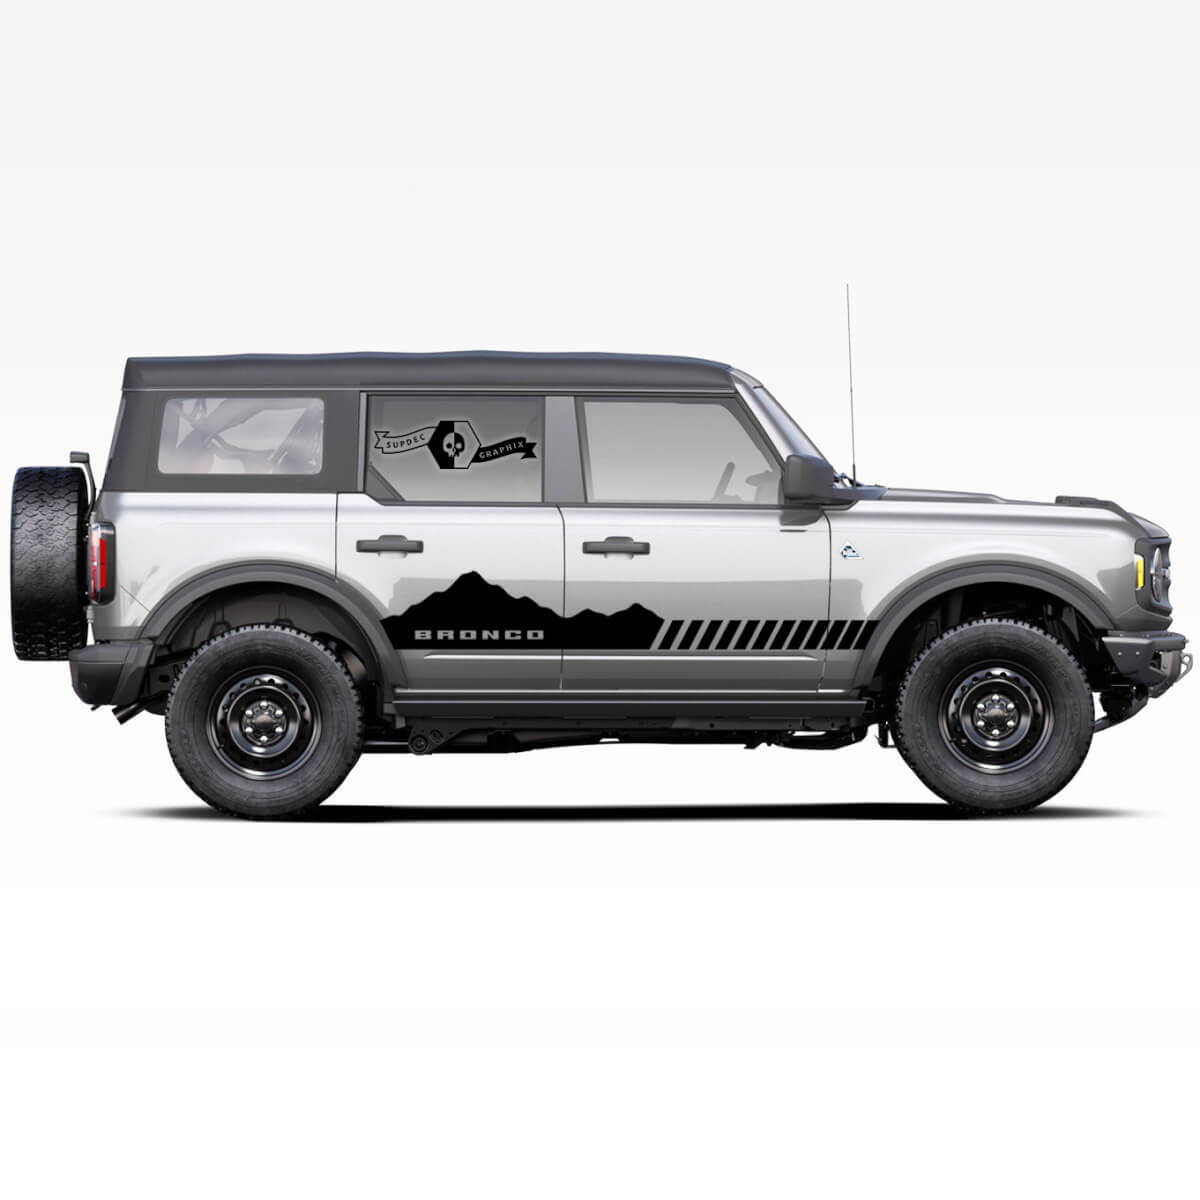 Pair of Bronco Mountains Badlands 4-door Side Stripe Decals Stickers for Ford Bronco 2021